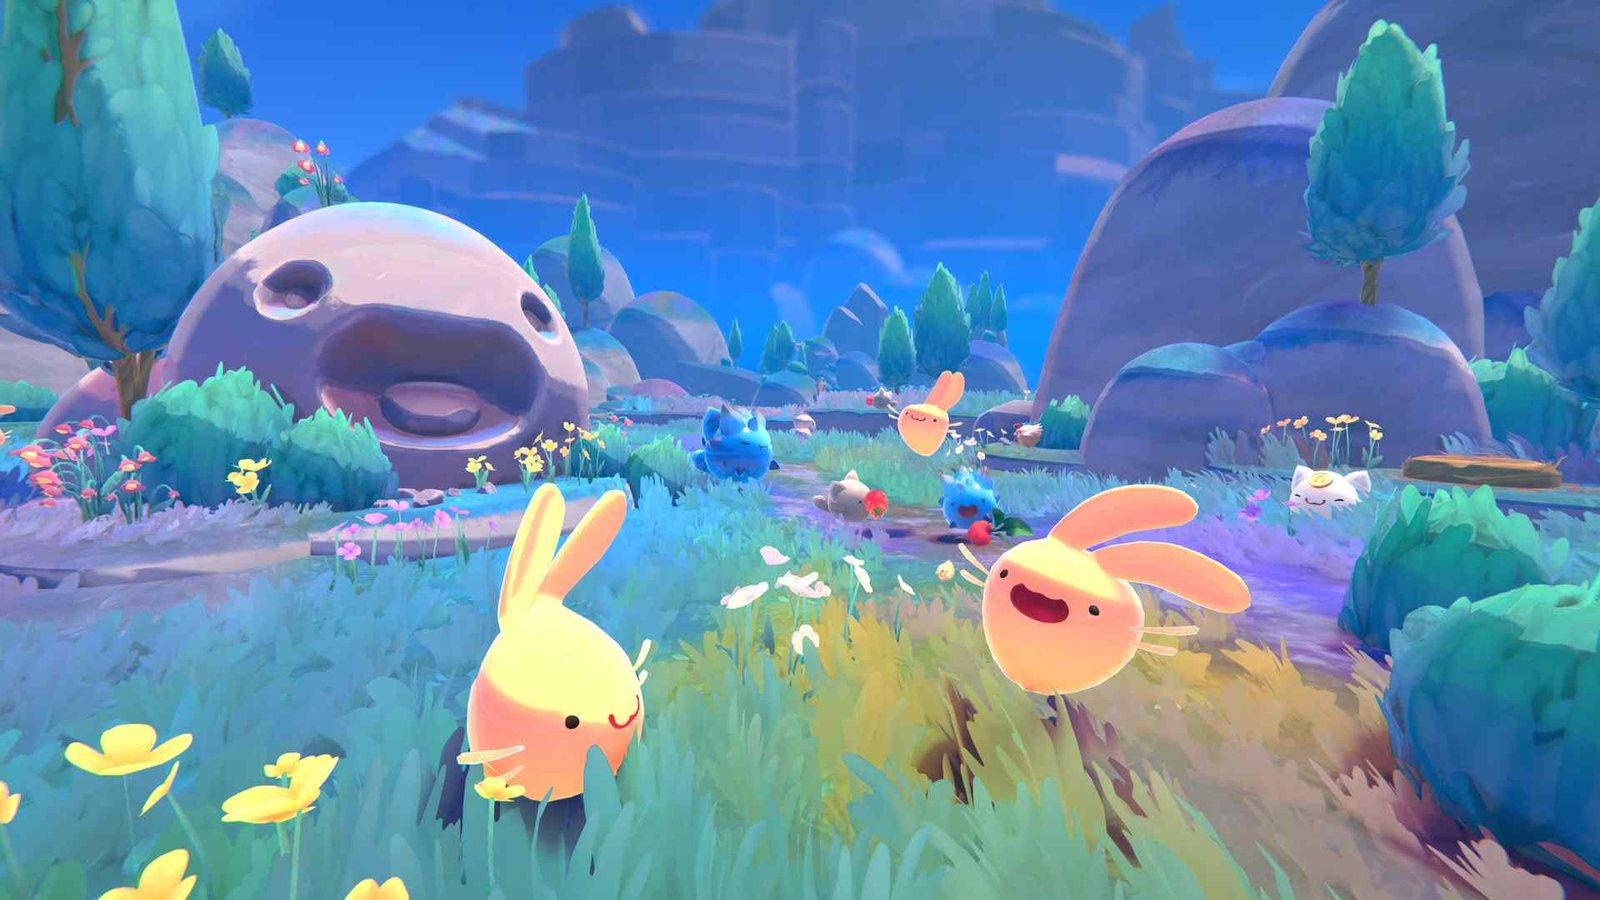 Slime Rancher 2 coming to Xbox Game Pass: Here's everything you need to know